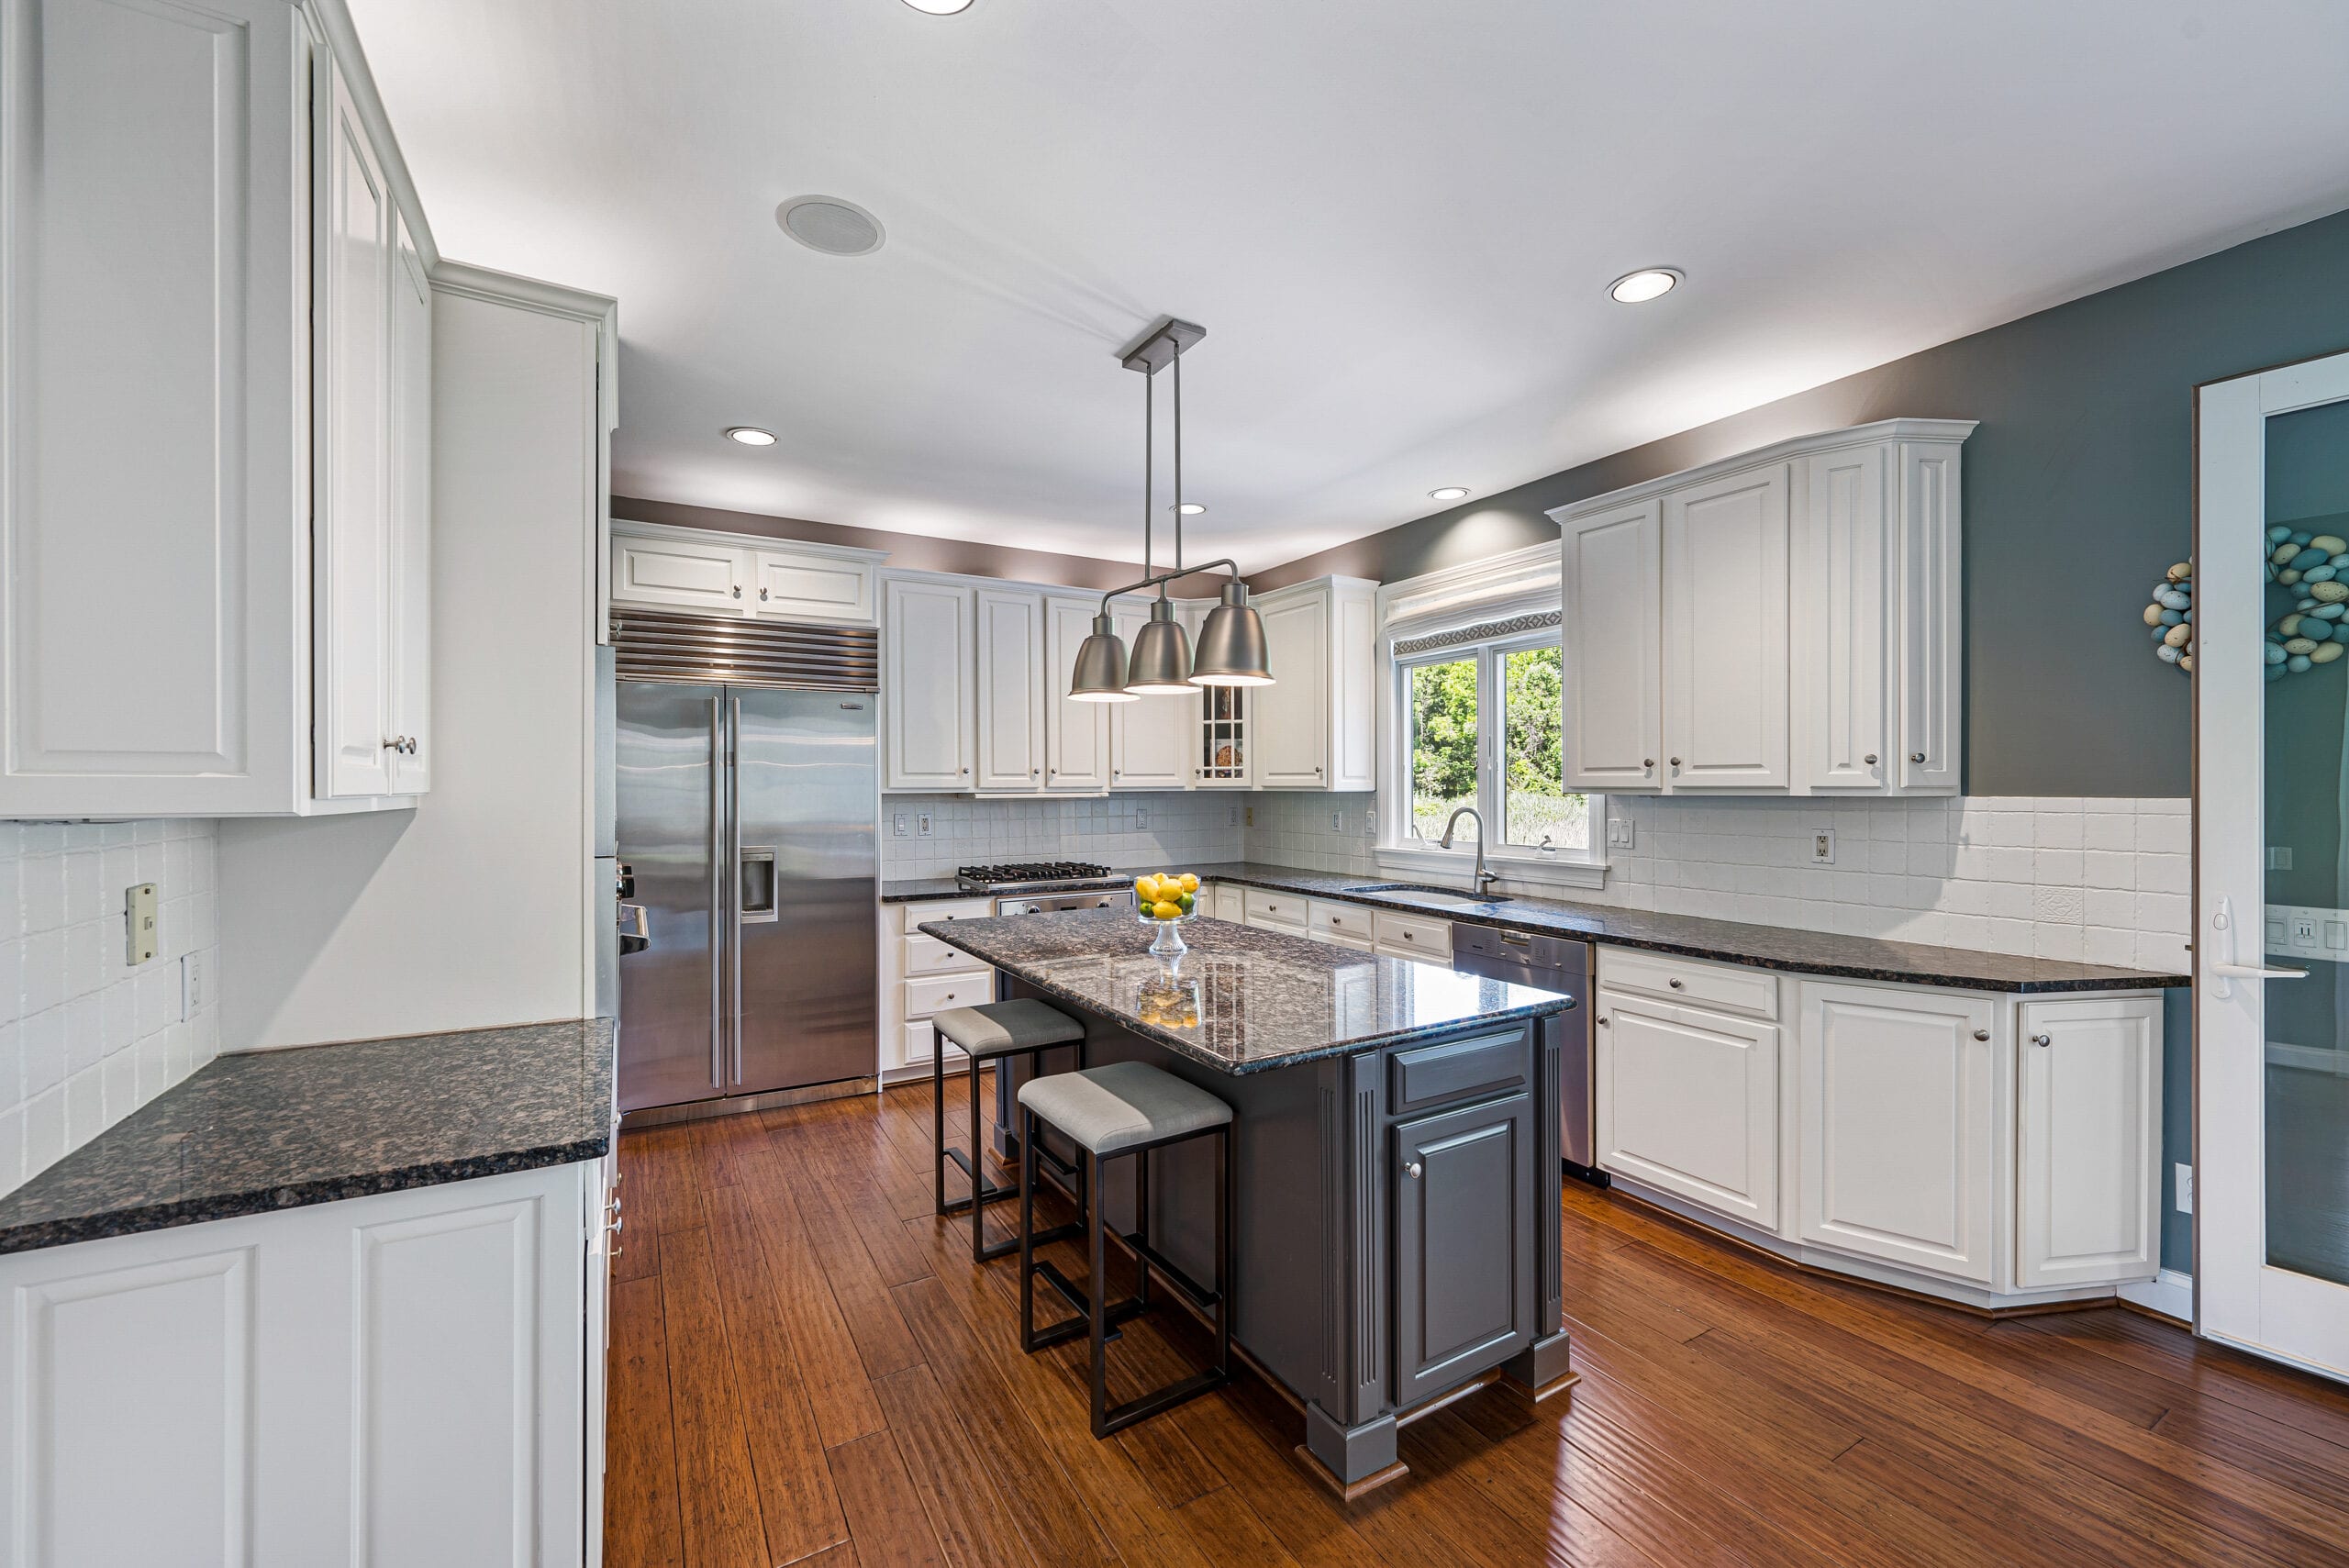 Chester County Real Estate Photography of a high end kitchen